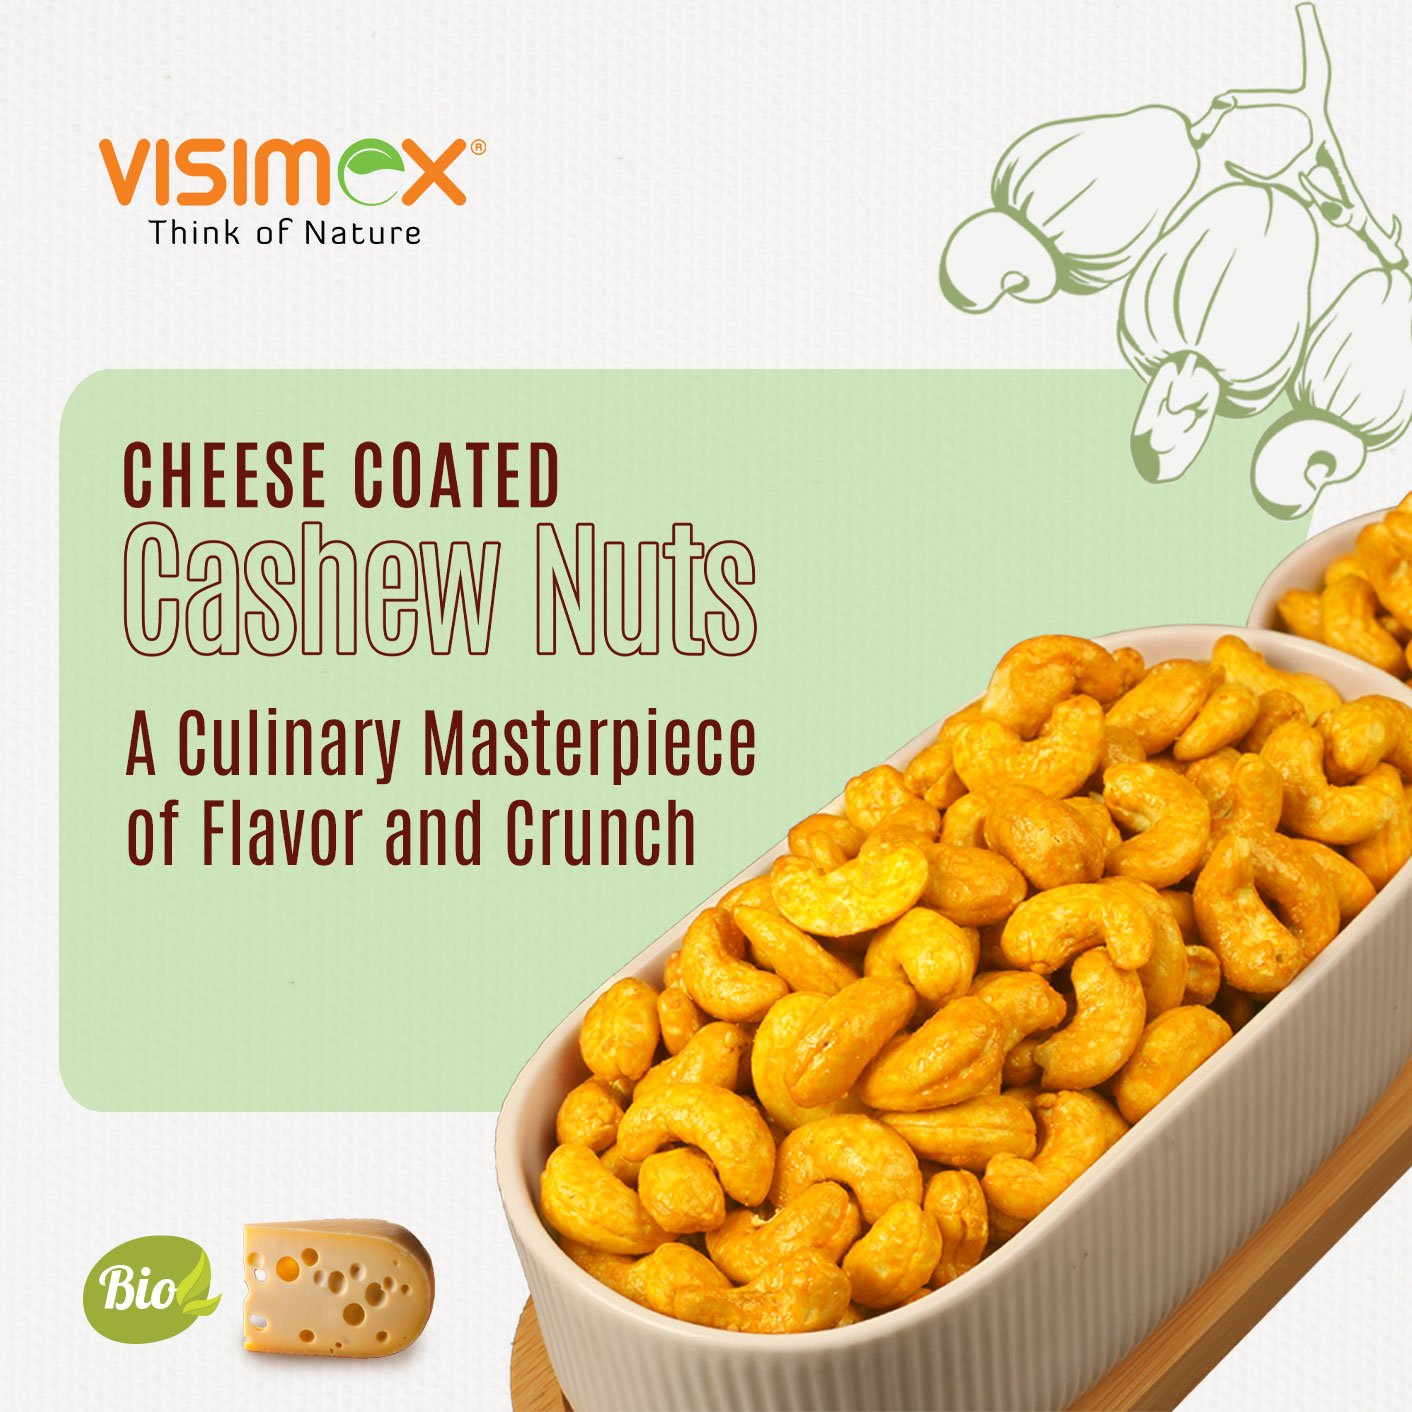 Cheese Coated Cashew Nuts: A Culinary Masterpiece of Flavor and Crunch